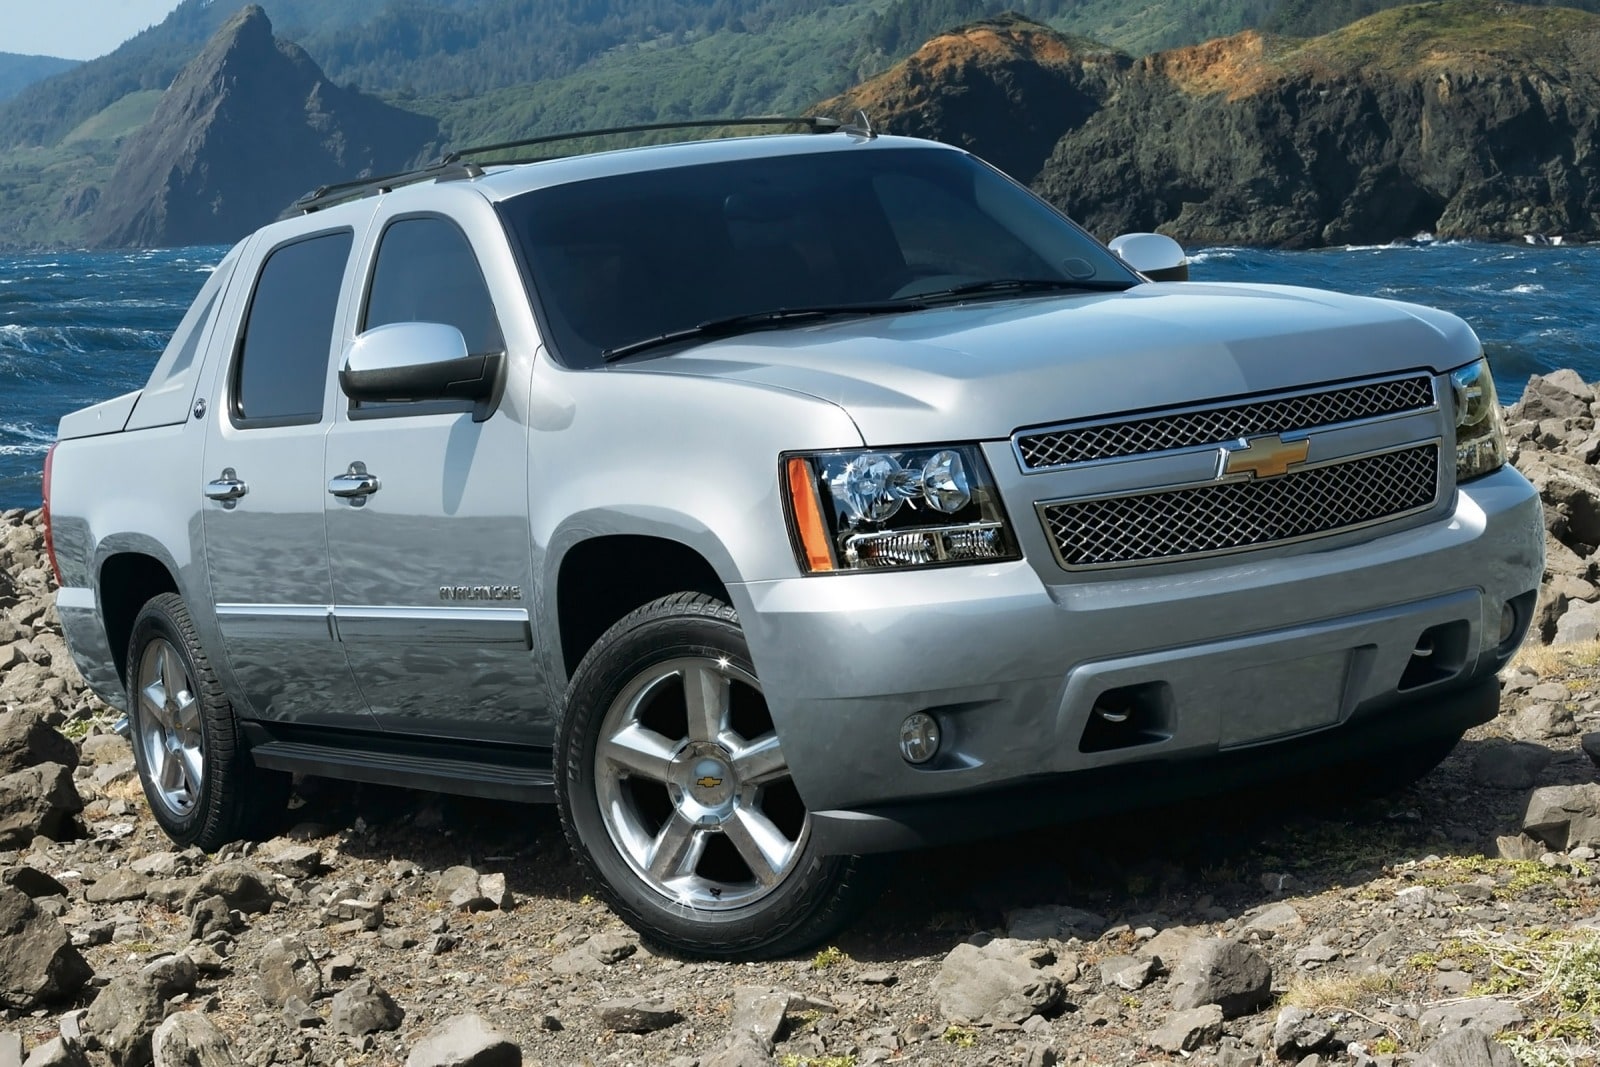 2013 Chevy Black Diamond Avalanche Review & Ratings | Edmunds